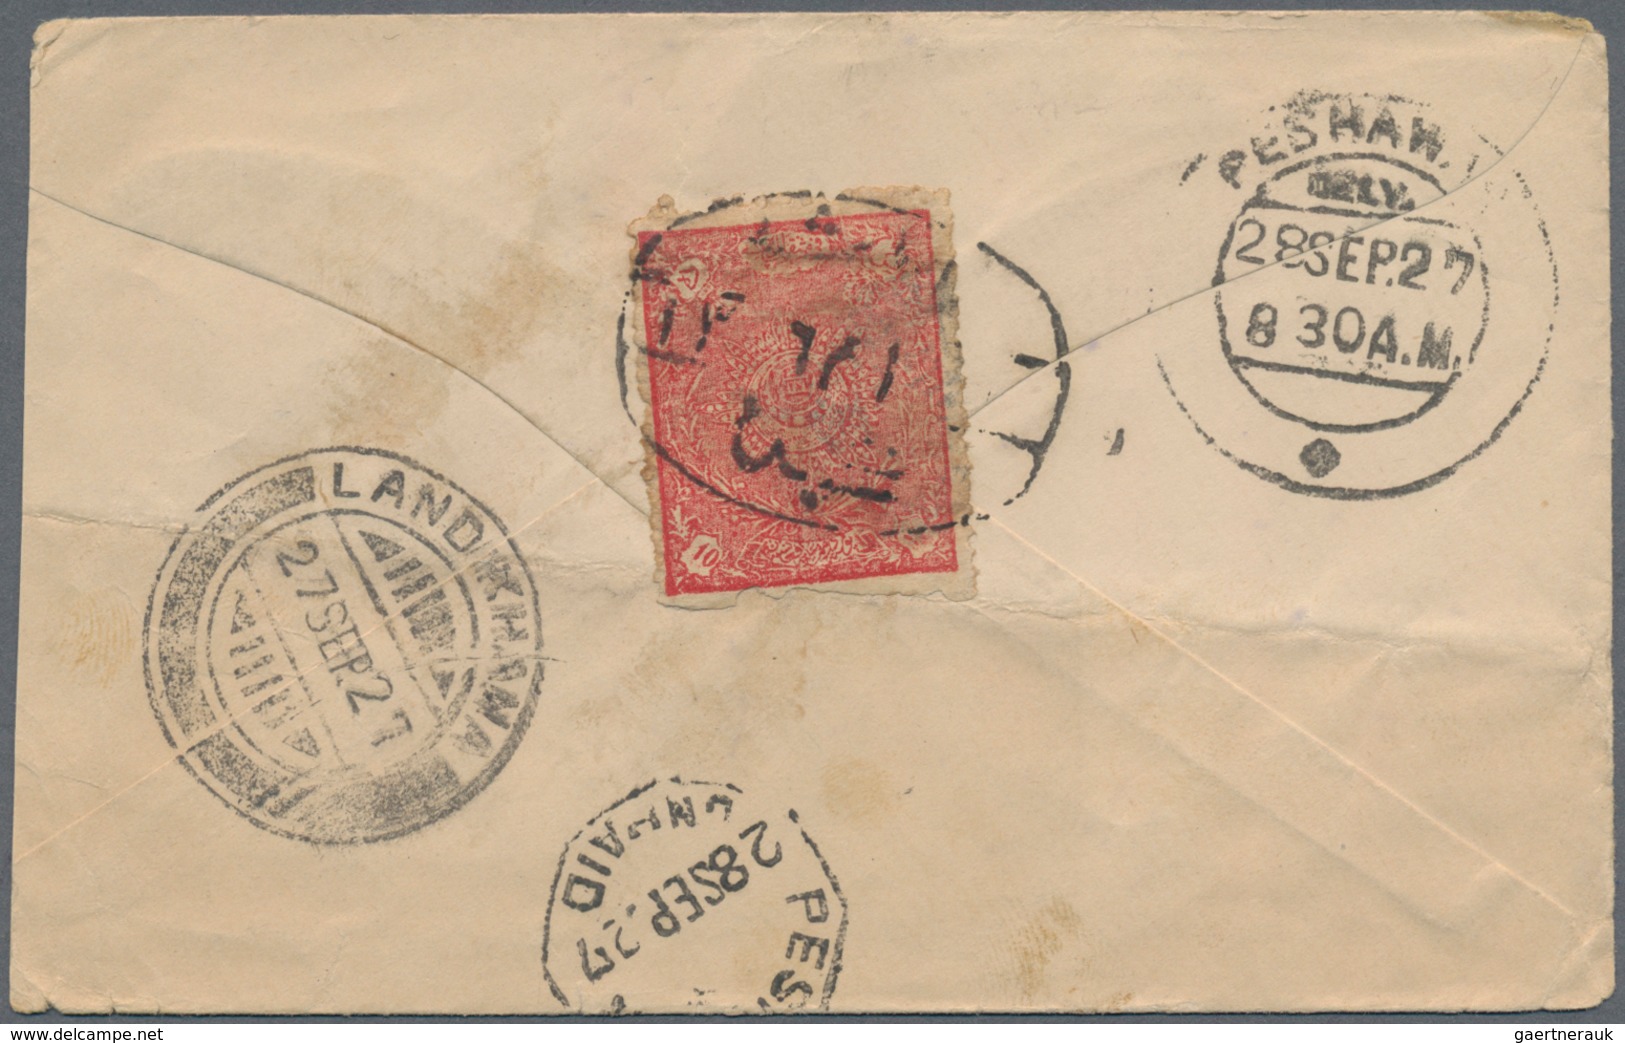 Afghanistan: 1871-1932, Collection of 44 covers, or parts of covers, and postal stationery items, mo